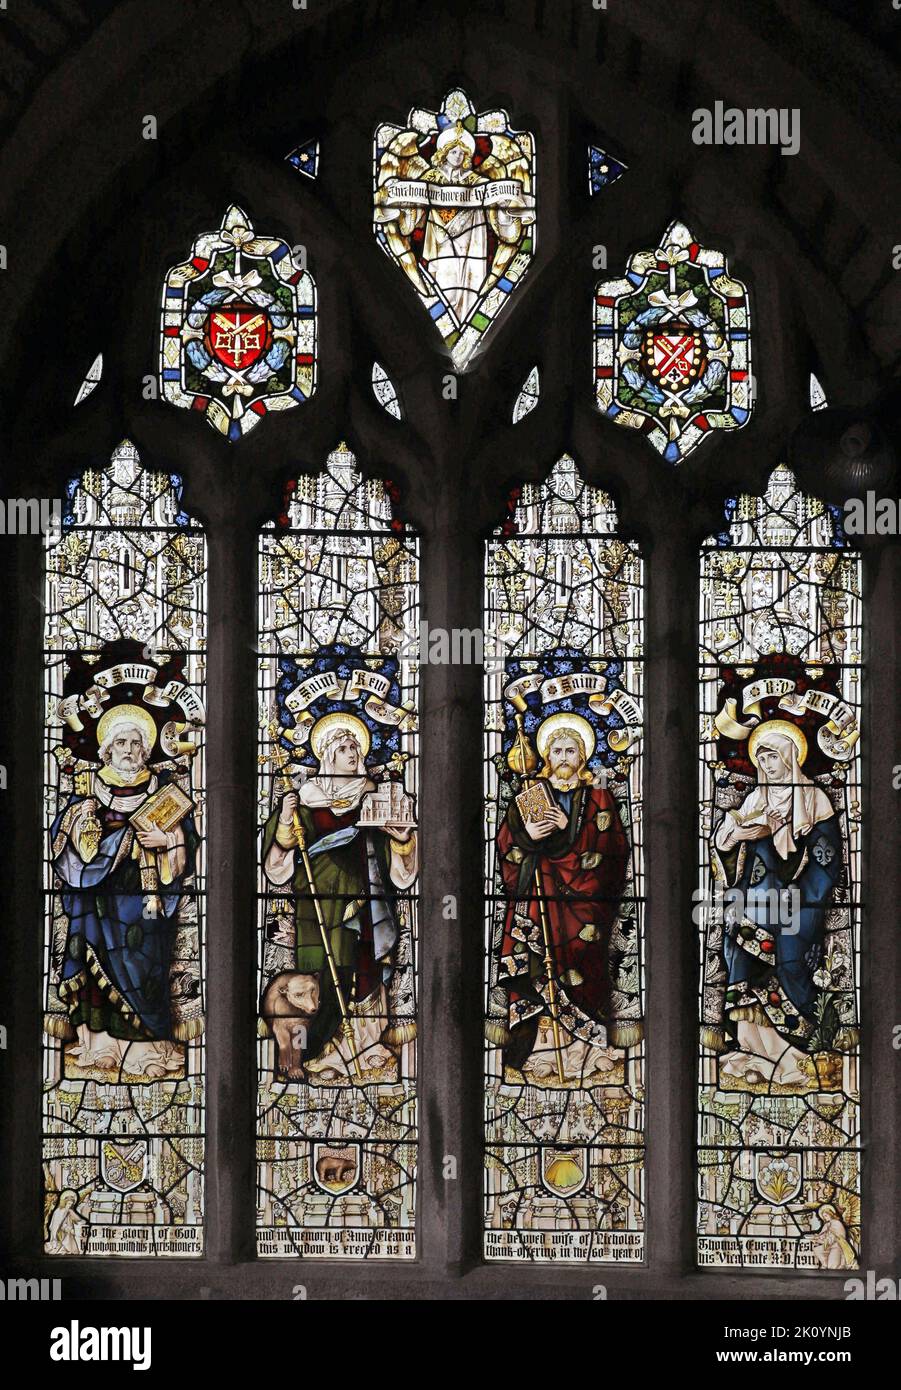 Stained glass window by Percy Bacon & Brothers depicting Saints Peter, Kew, James & the Blessed Virgin Mary, St James Church St Kew, Cornwall Stock Photo